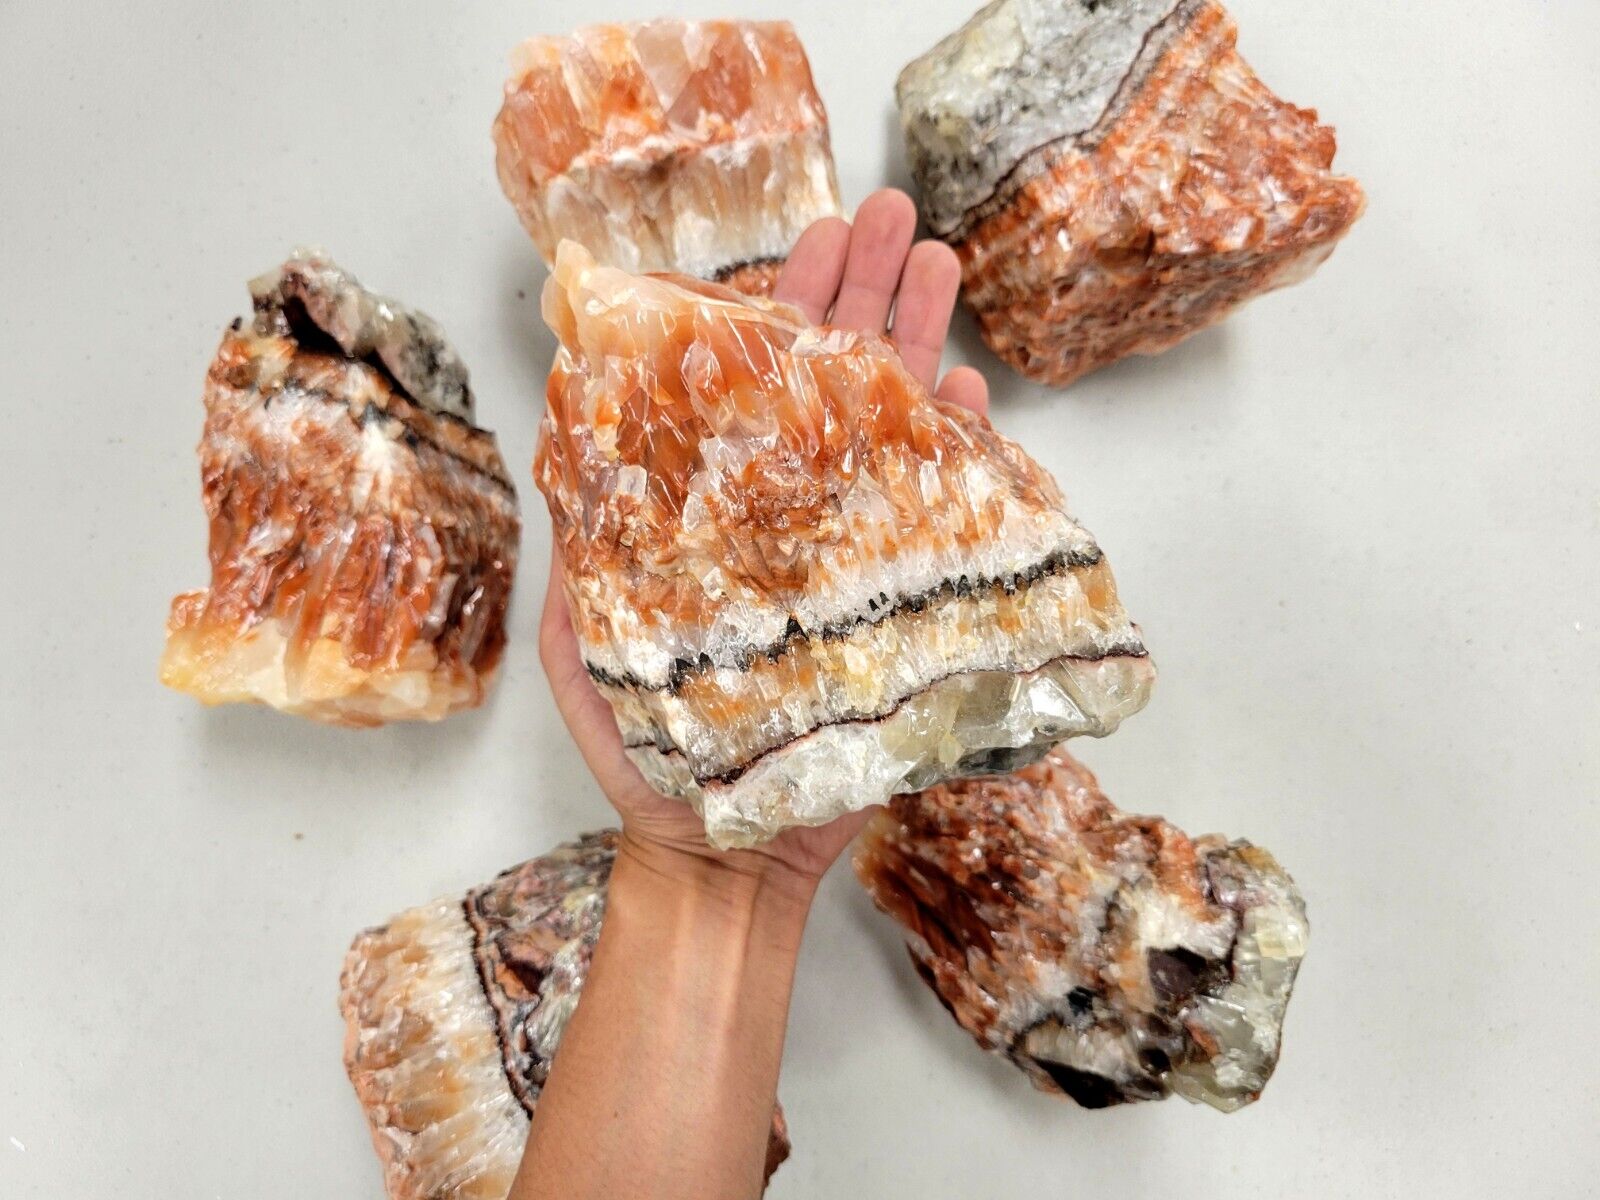 JUMBO CALCITE CRYSTAL TRI COLOR LARGE ROCK NATURAL FOR DISPLAY GIFTS AND HEALING